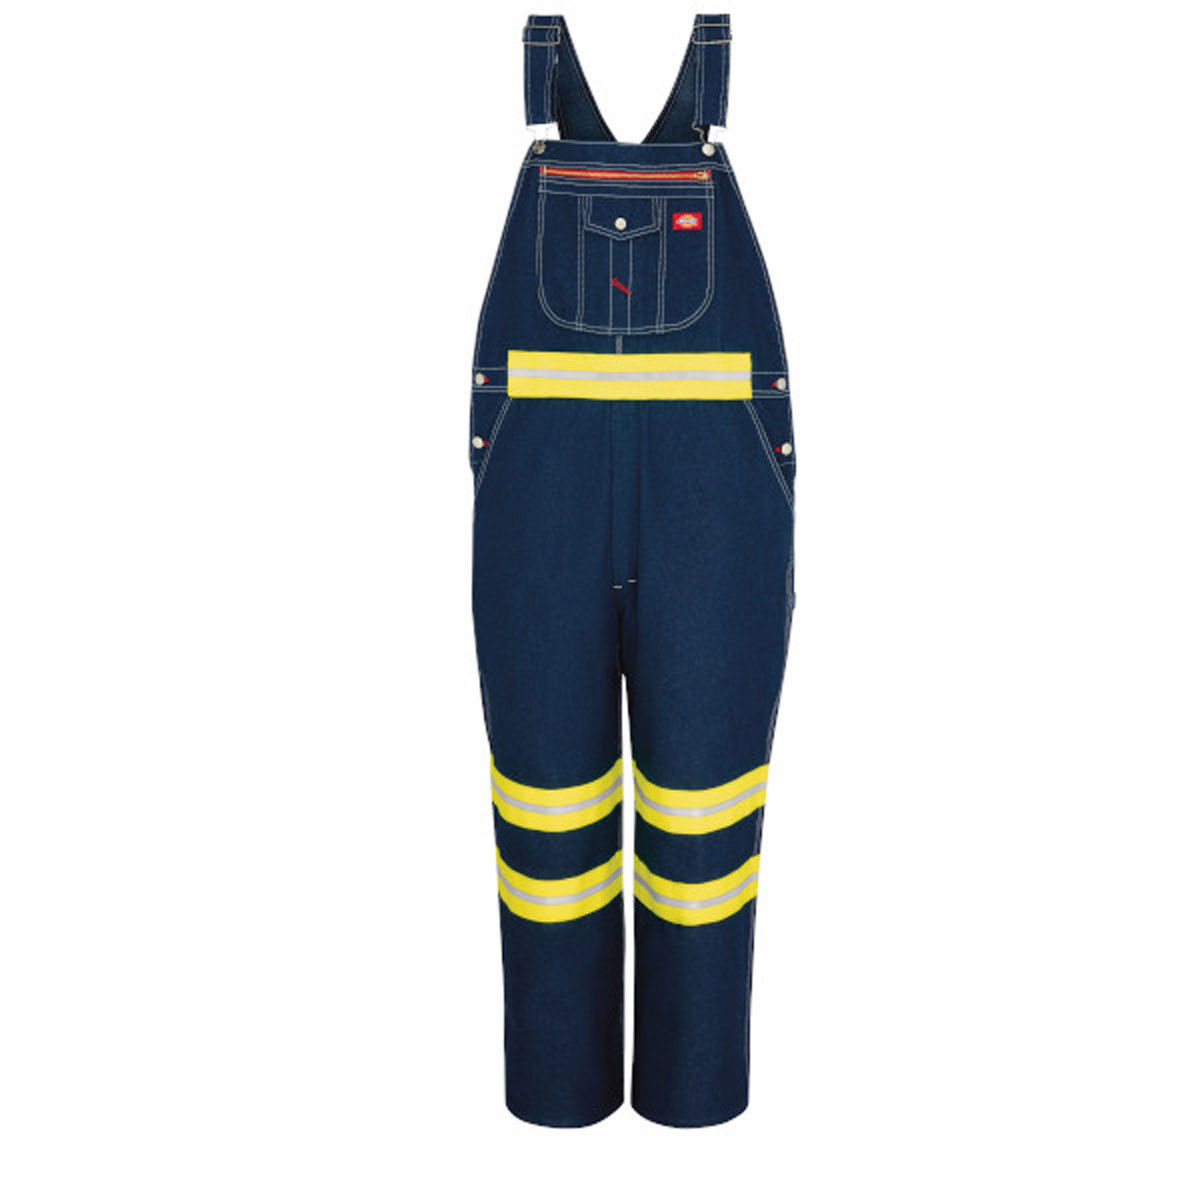 What features do the Dickiese overalls have?